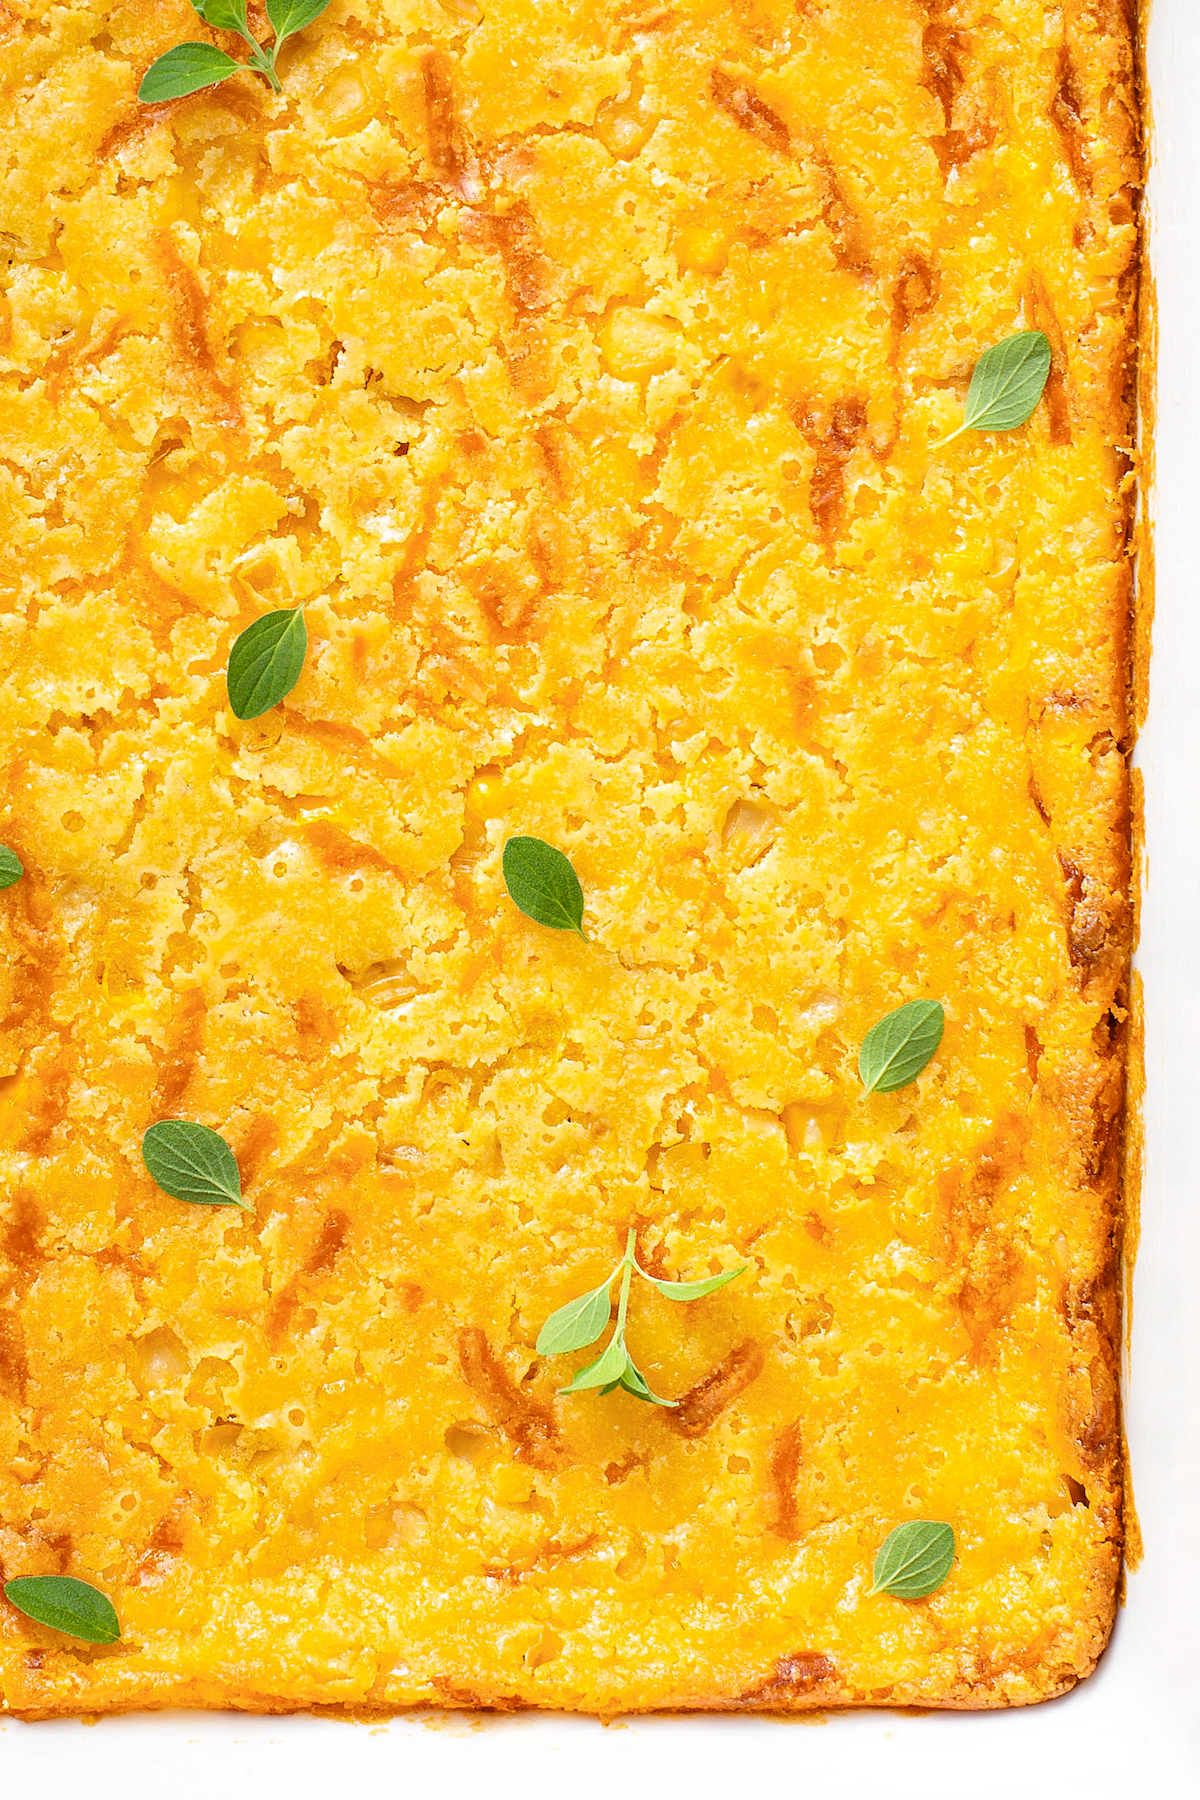 Sweet and cheesy jiffy corn casserole baked in a 9x13 baking dish with fresh herbs sprinkled on top.